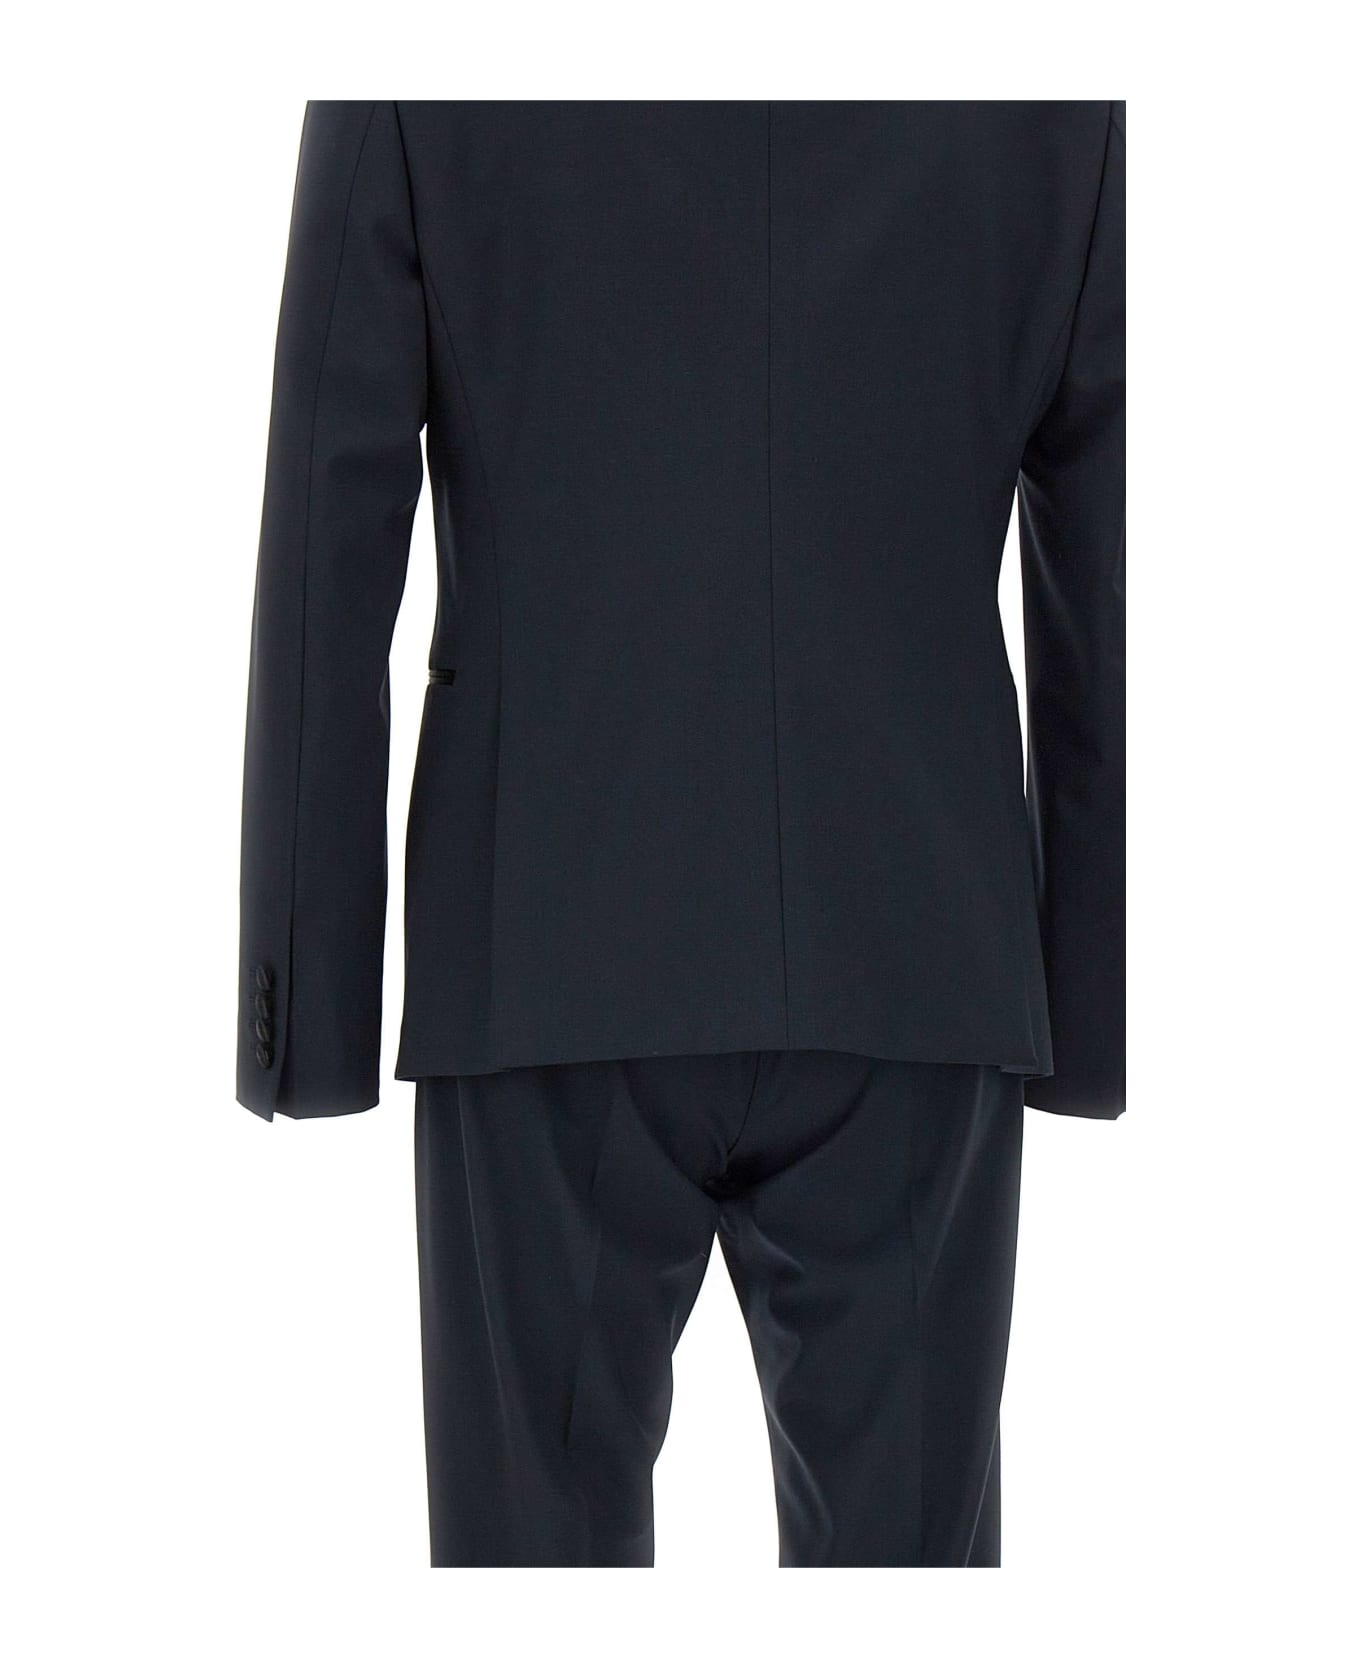 Emporio Armani Fresh Wool Two-piece Formal Suit - Navy スーツ